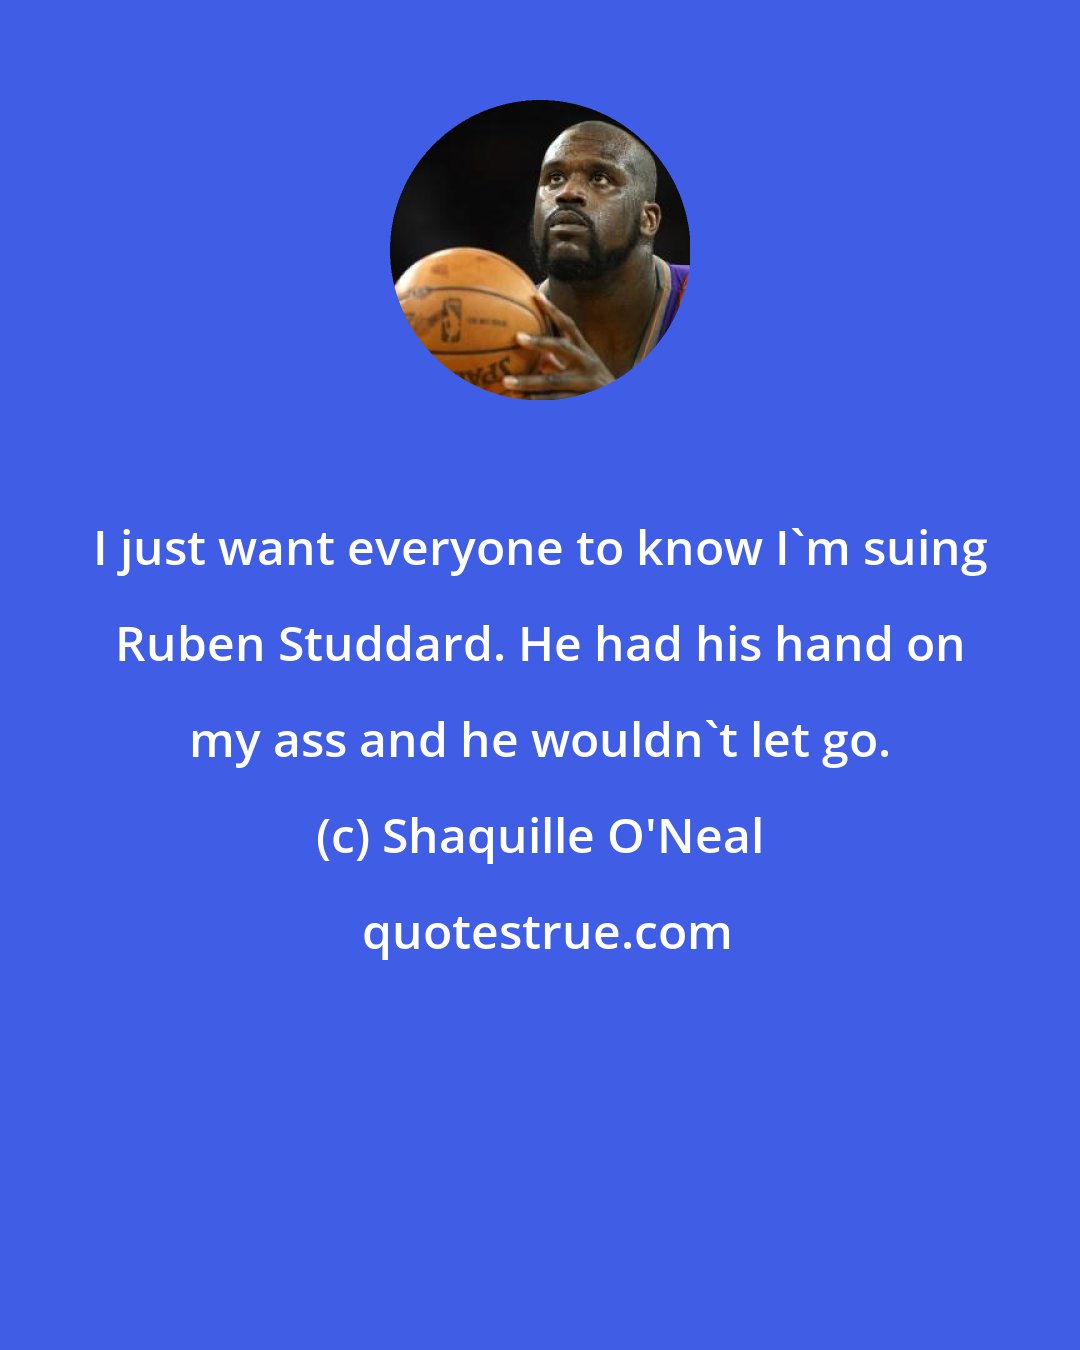 Shaquille O'Neal: I just want everyone to know I'm suing Ruben Studdard. He had his hand on my ass and he wouldn't let go.